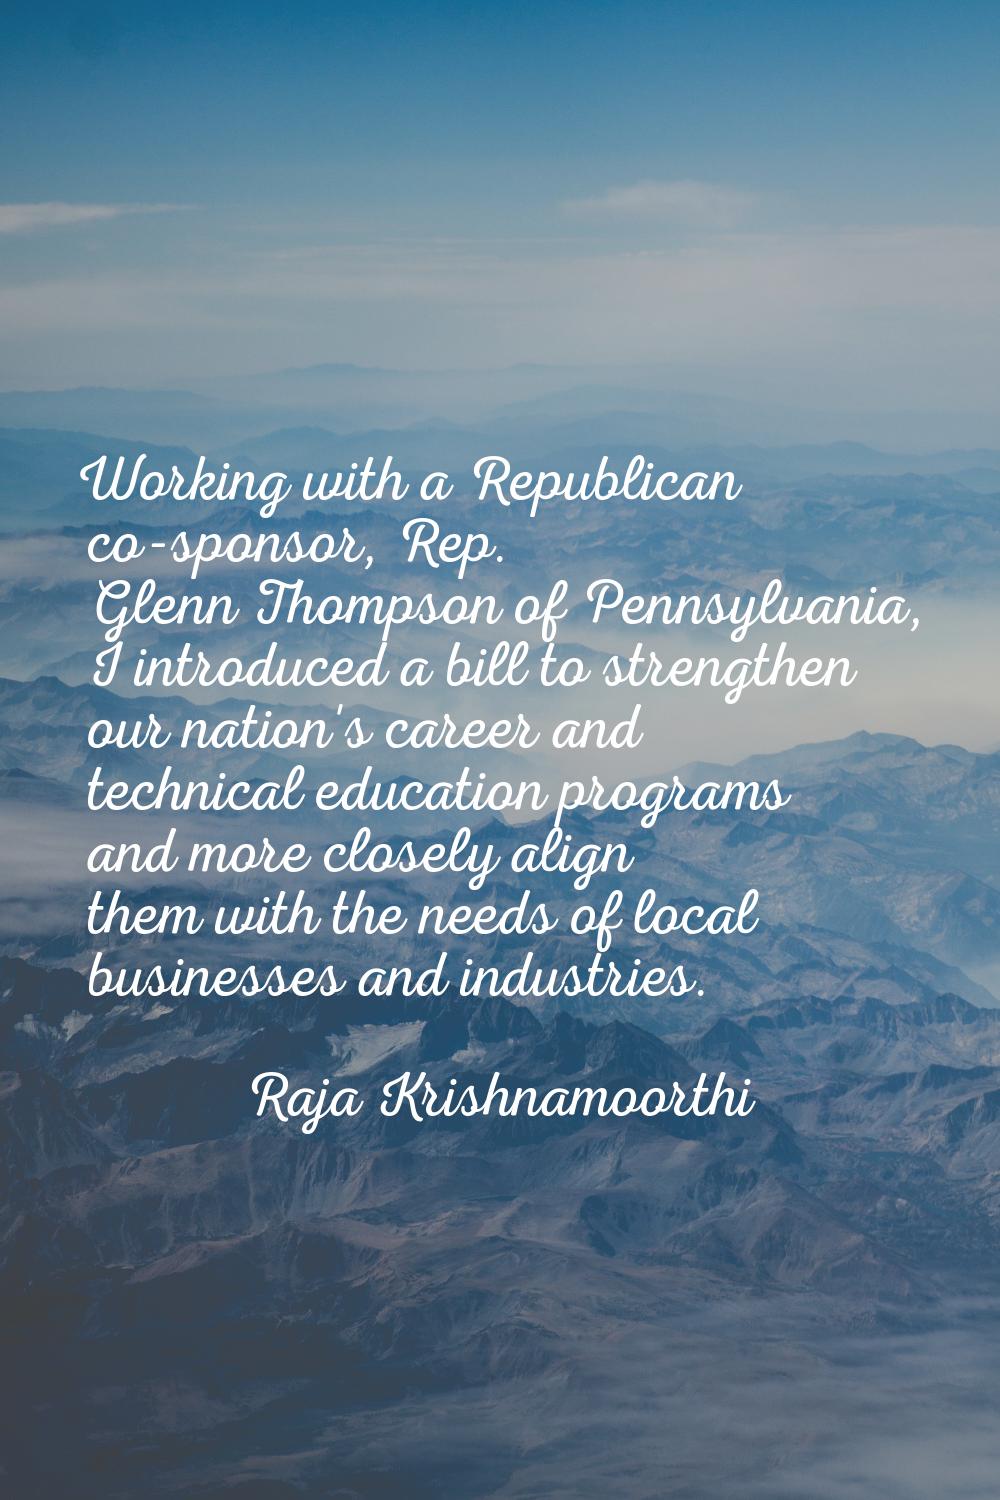 Working with a Republican co-sponsor, Rep. Glenn Thompson of Pennsylvania, I introduced a bill to s